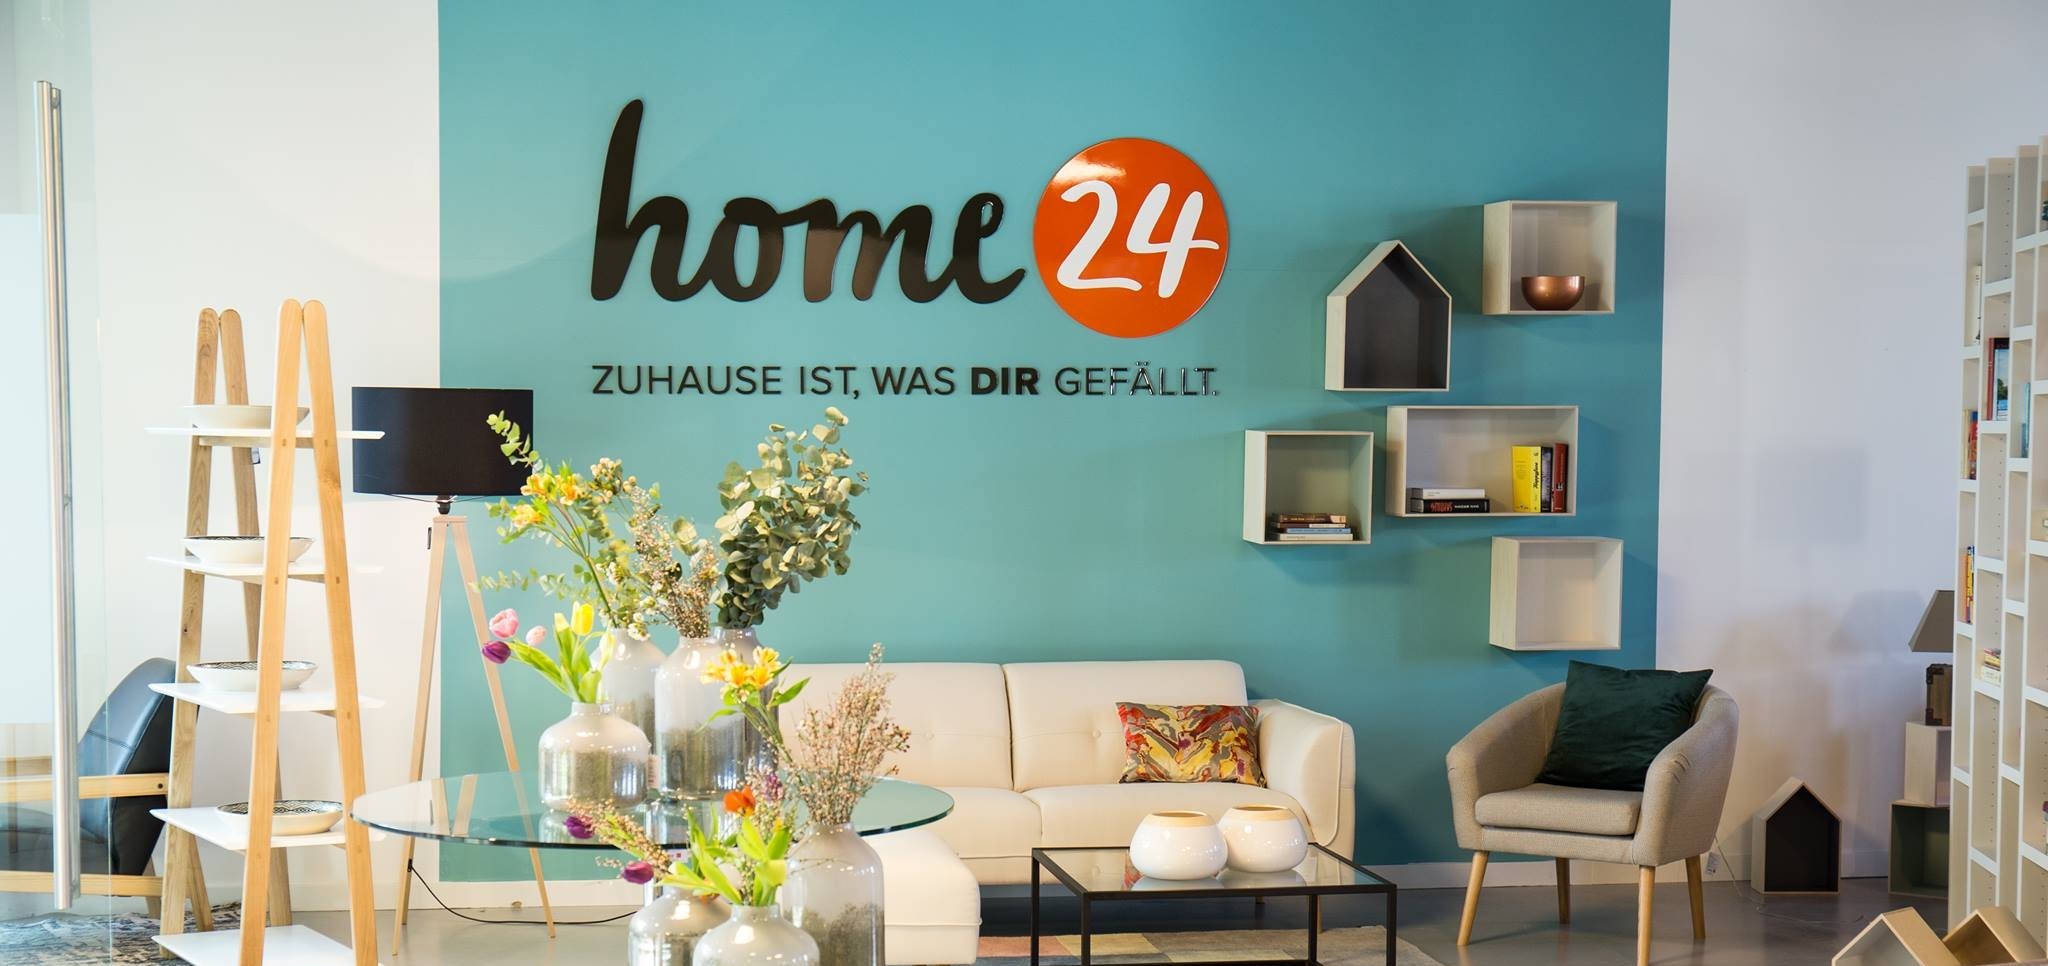 The home 24 logo is printed on the wall of a well-decorated room with lovely vasts, flowers, and a sofa, among other things.